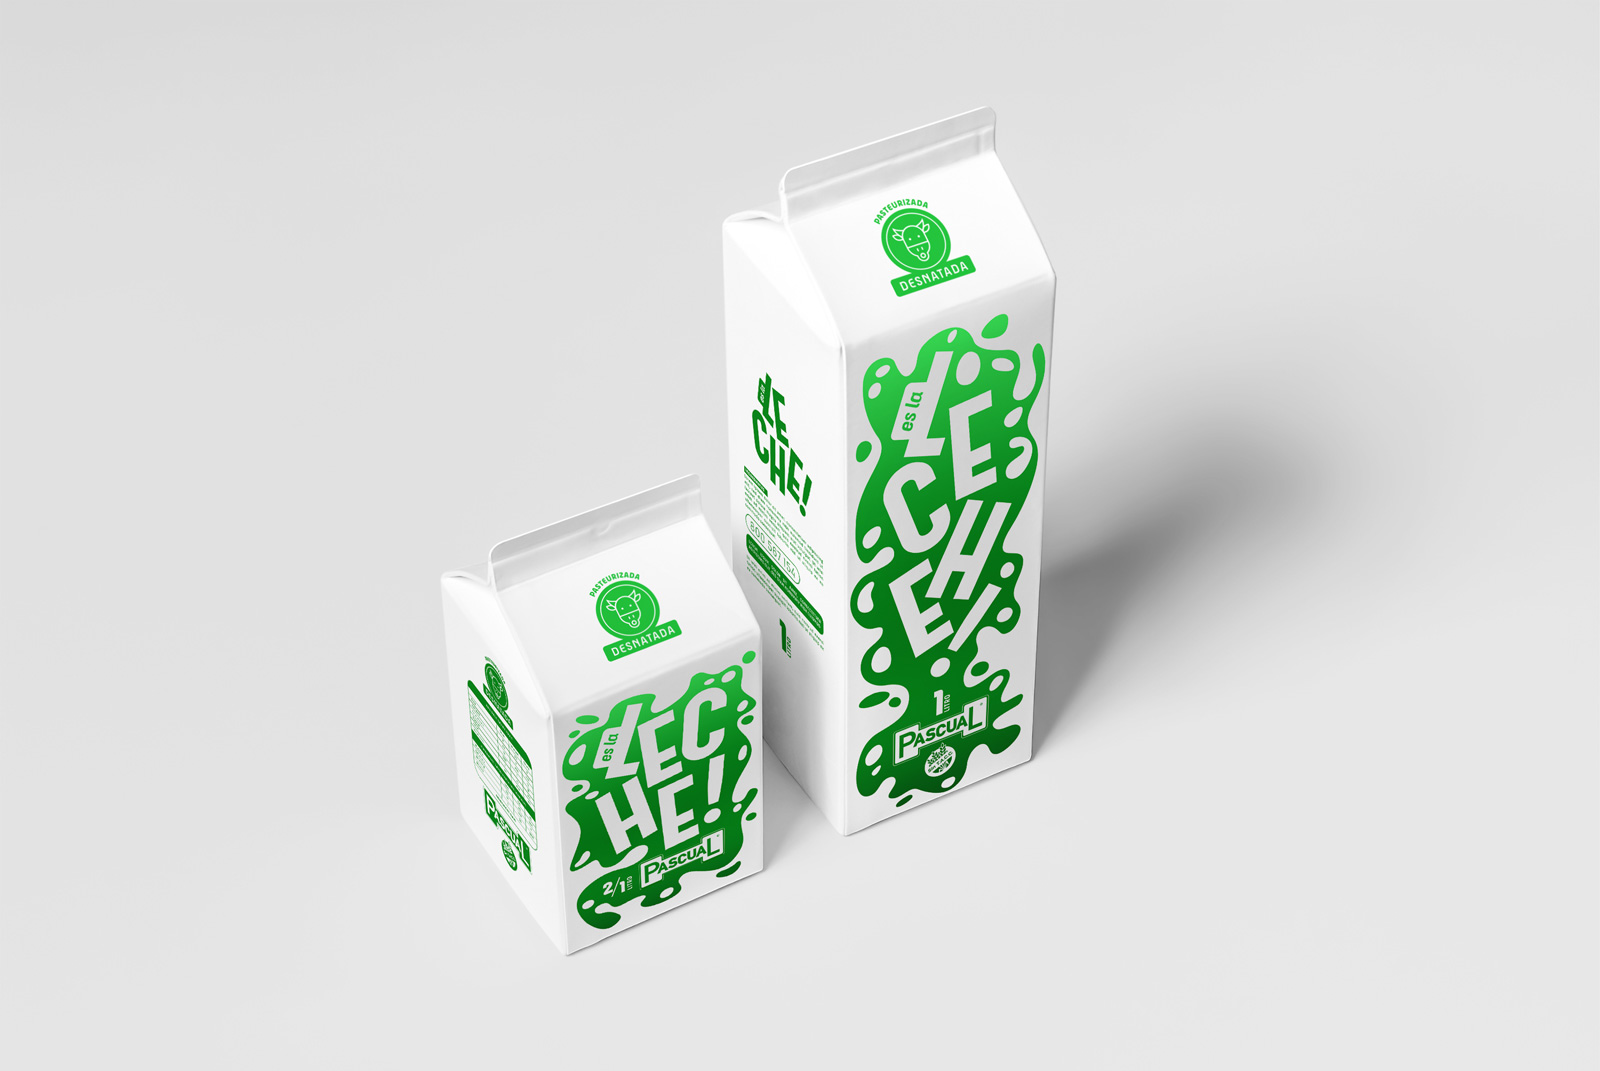 Leche-Pascual-Packaging-01